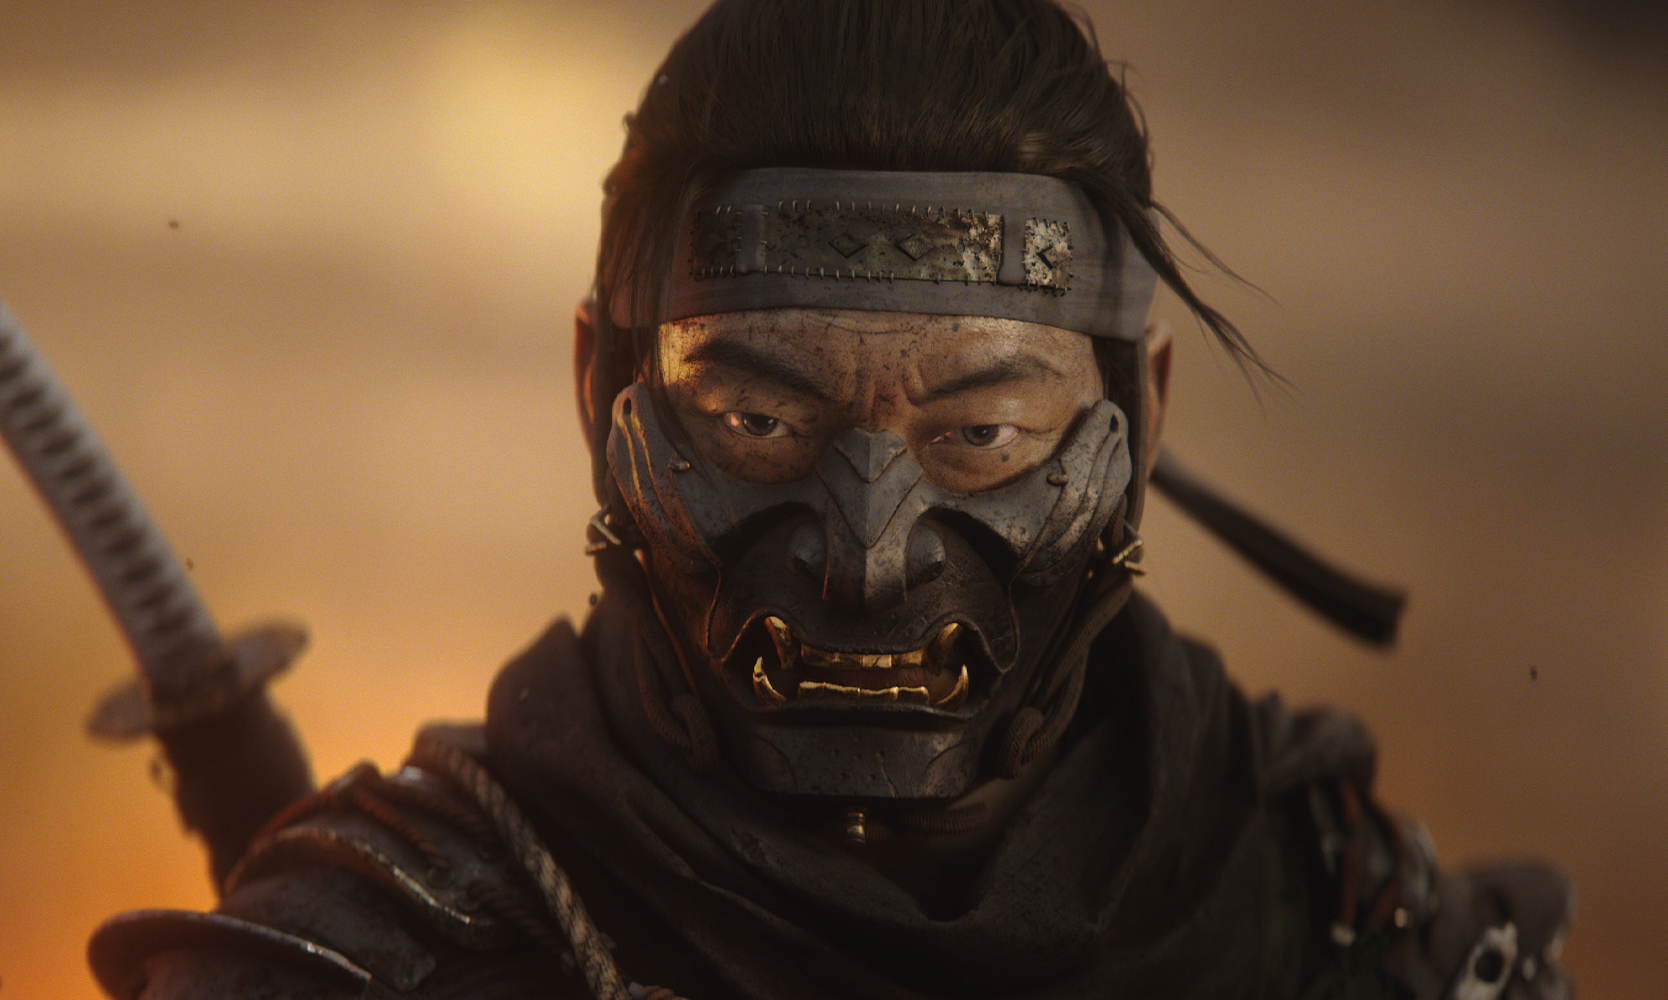 Ghost of Tsushima – “A Storm is Coming” Trailer